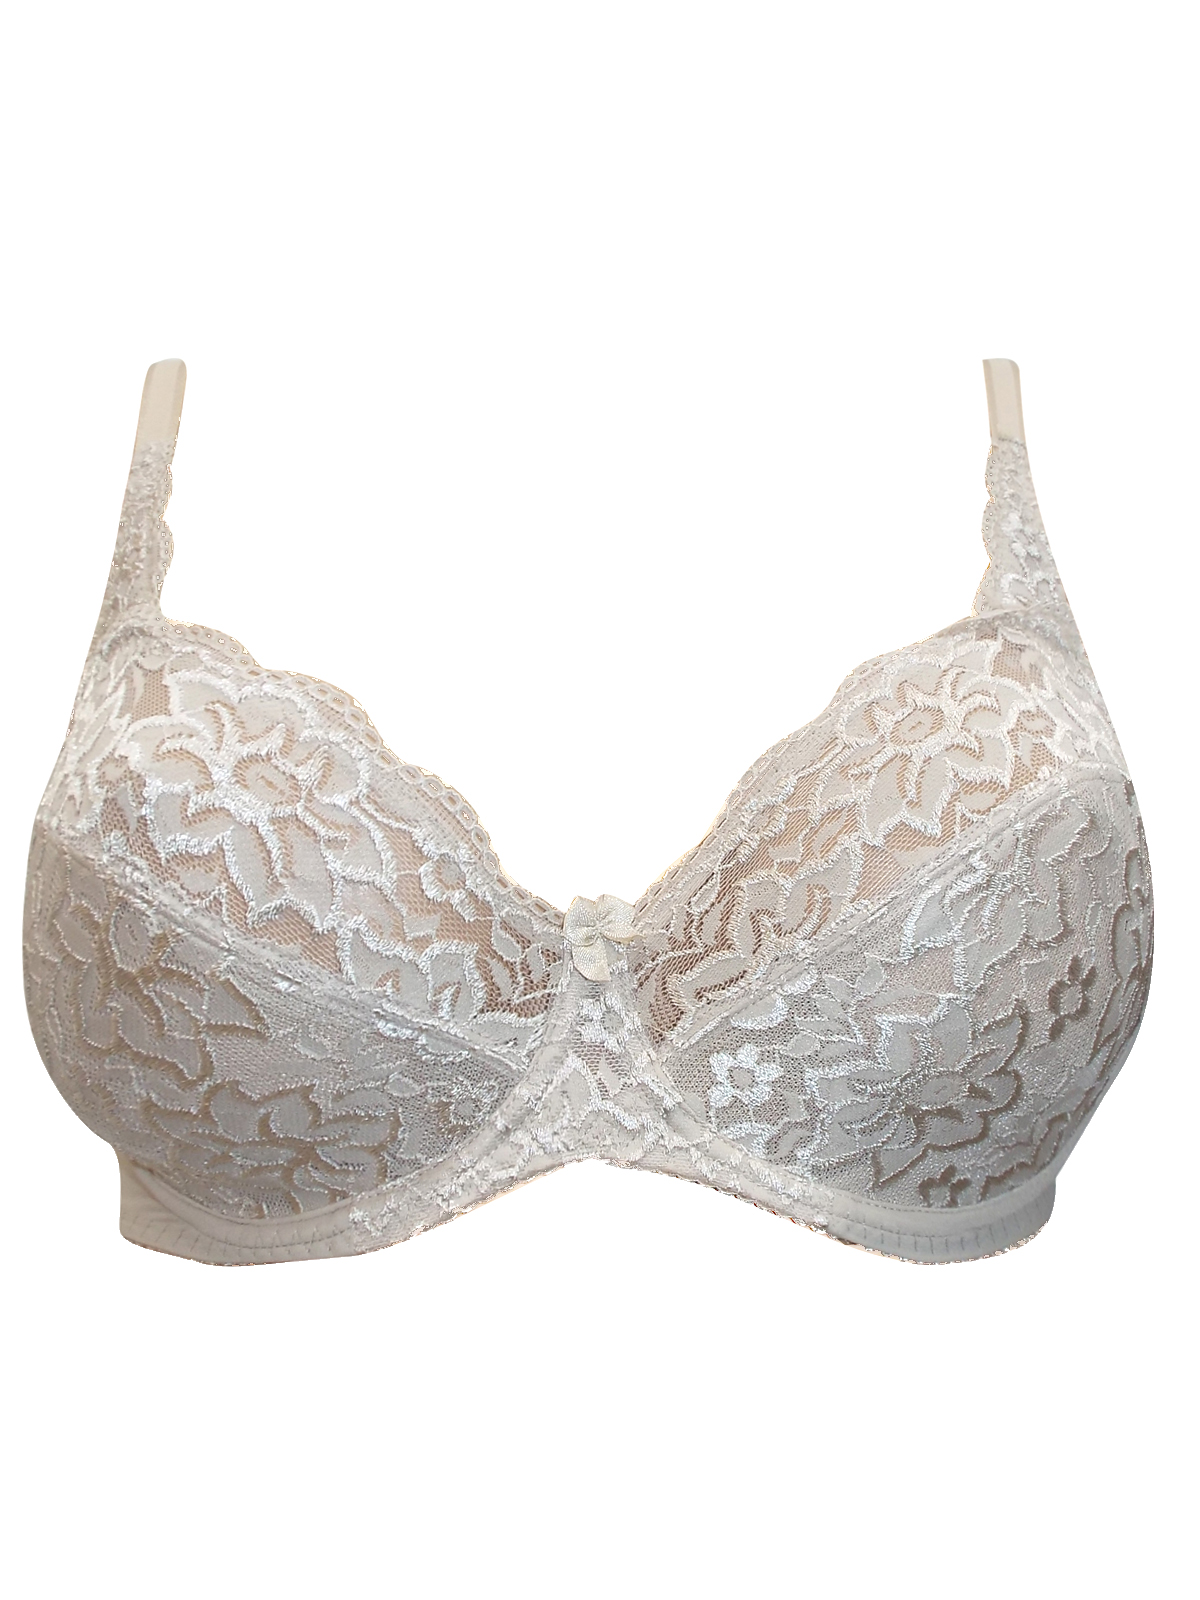 Naturana - - Naturana ALMOND Lace Underwired Full Cup Bra - Size 32 to ...